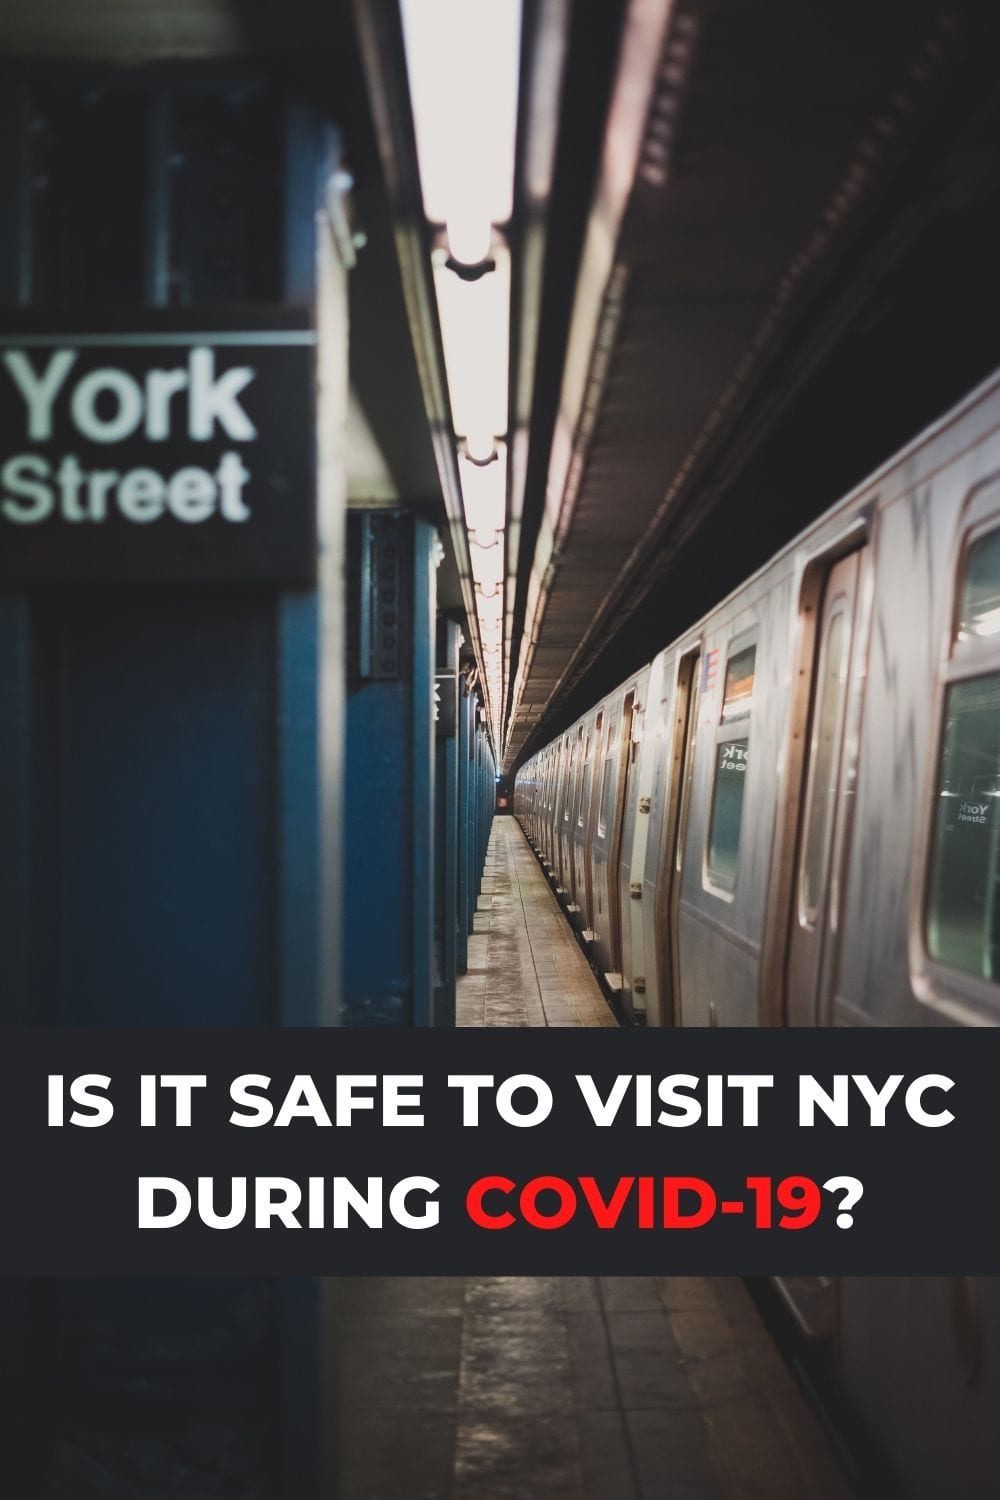 New York safe to visit - COVID-19